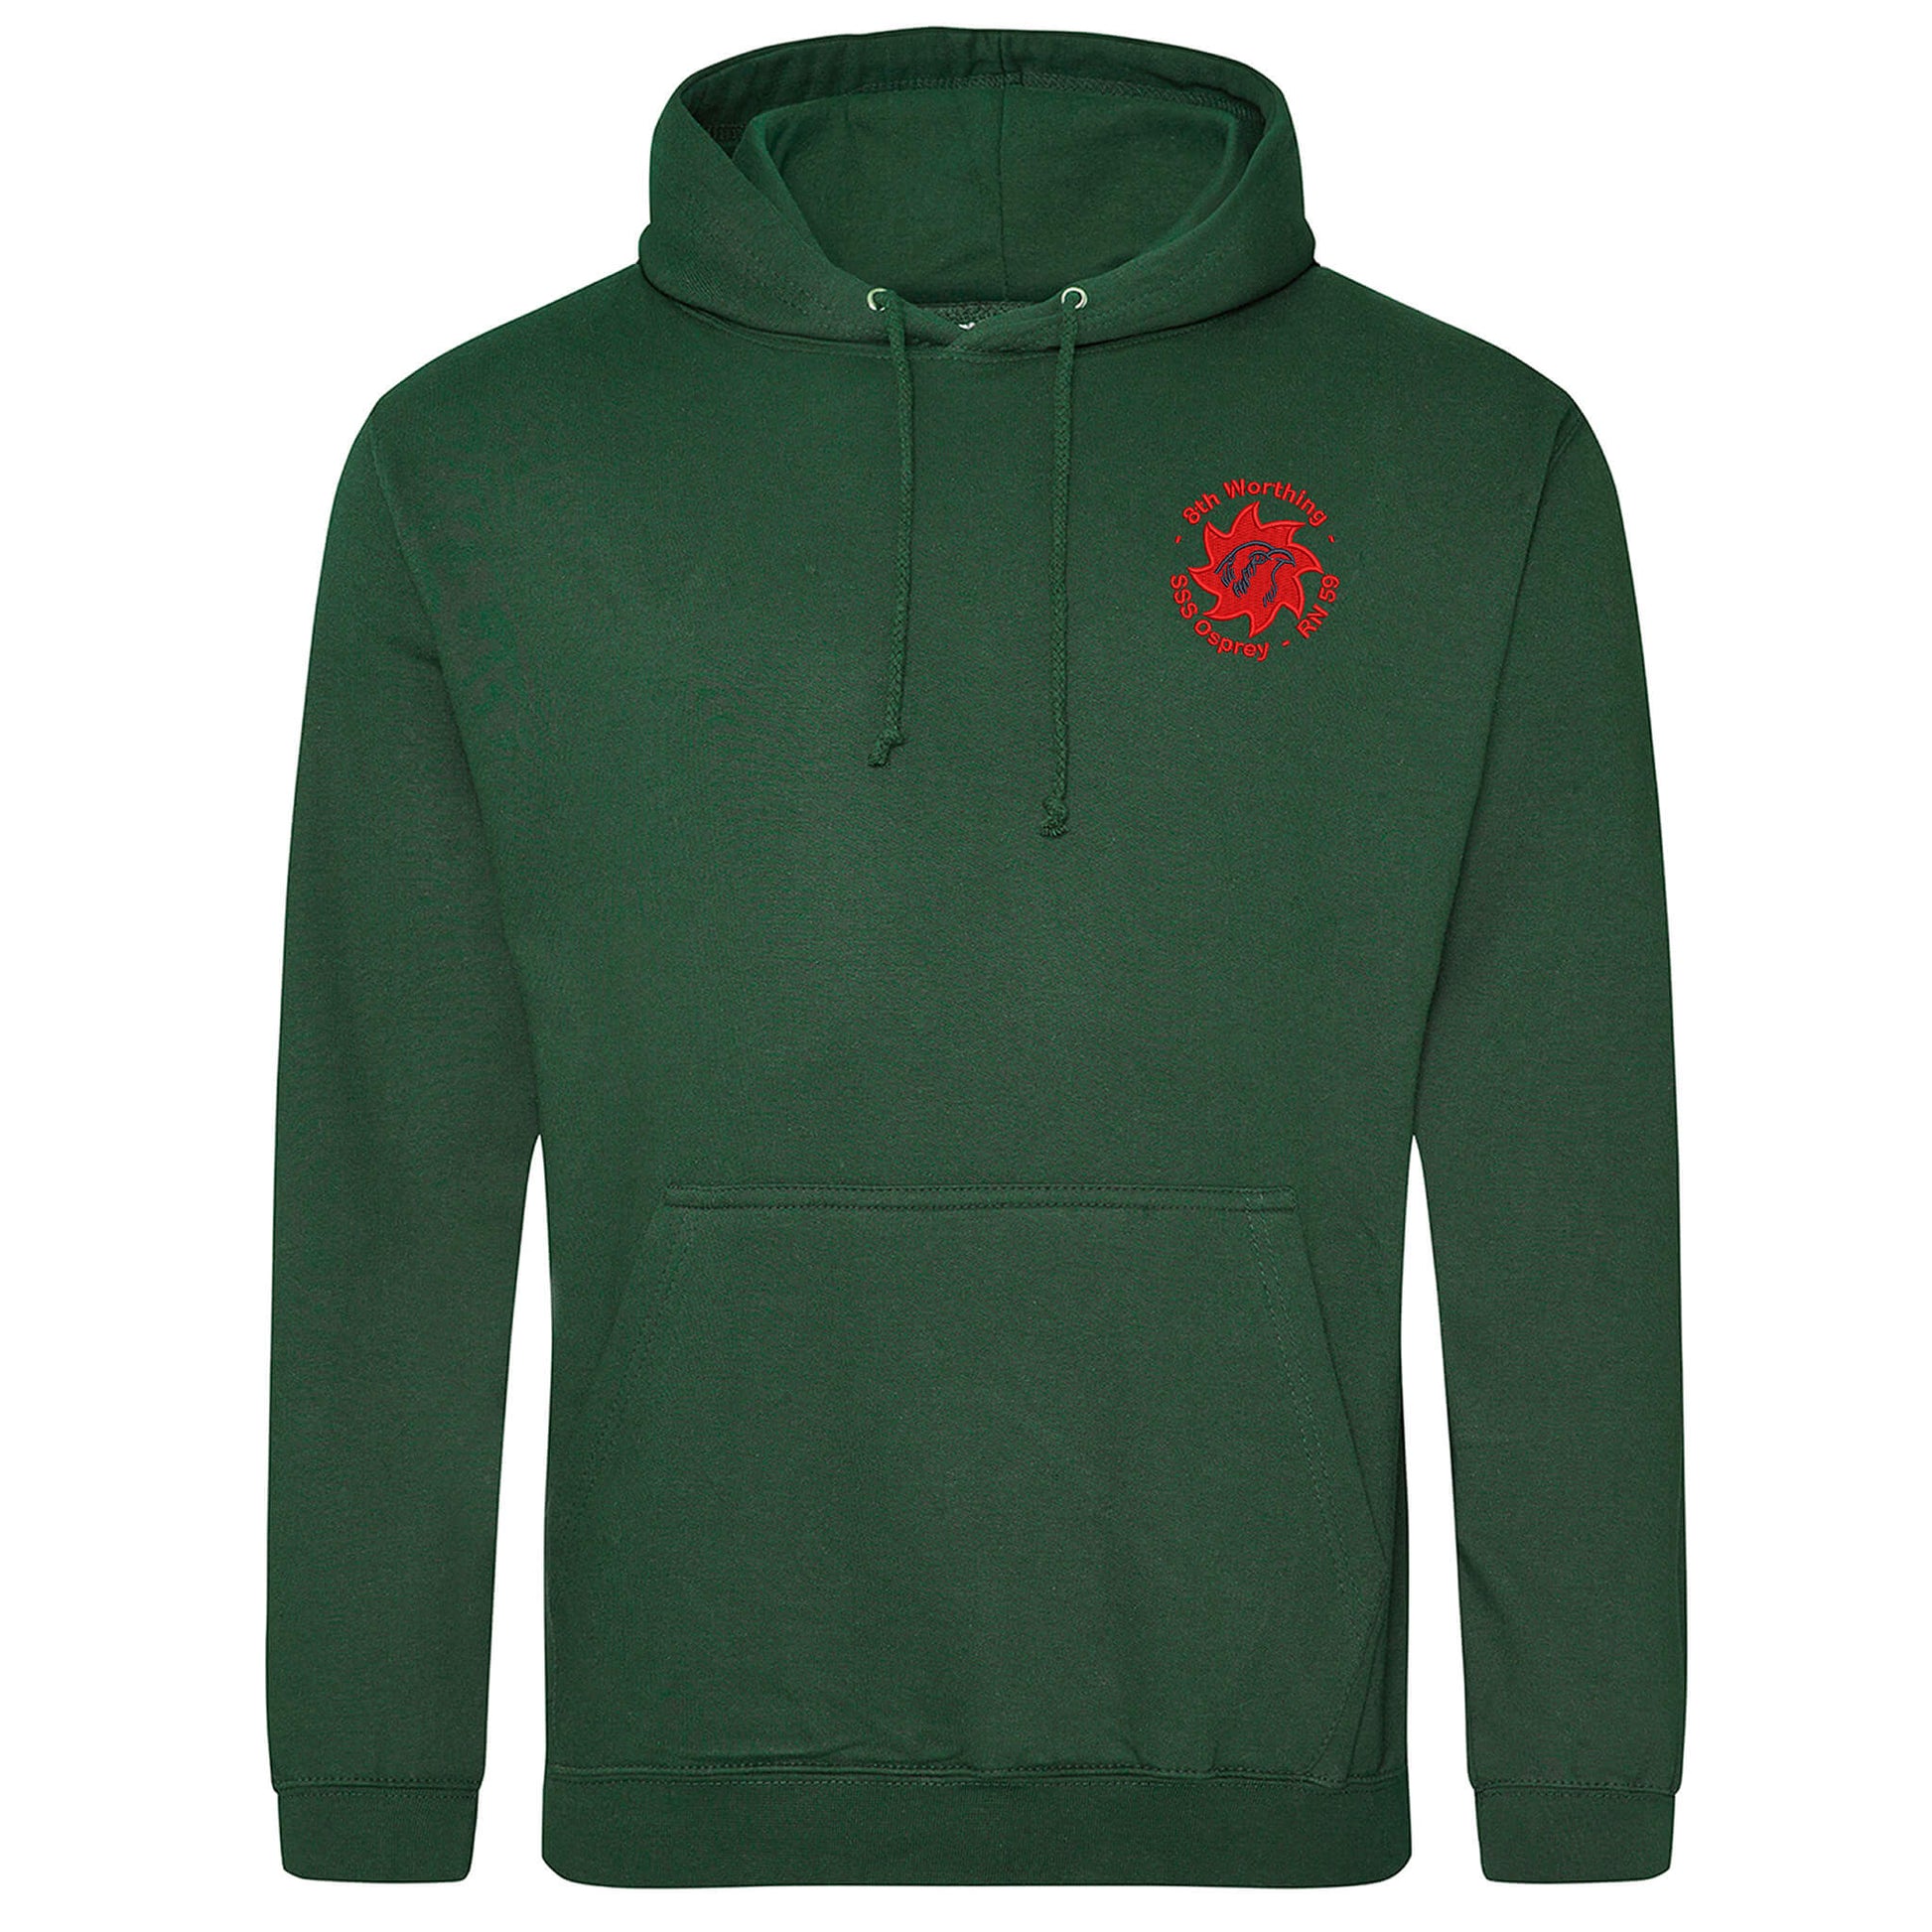 8th WORTHING SEA SCOUTS ADULTS CUBS EMBROIDERED HOODIE - Flamingo Rock®